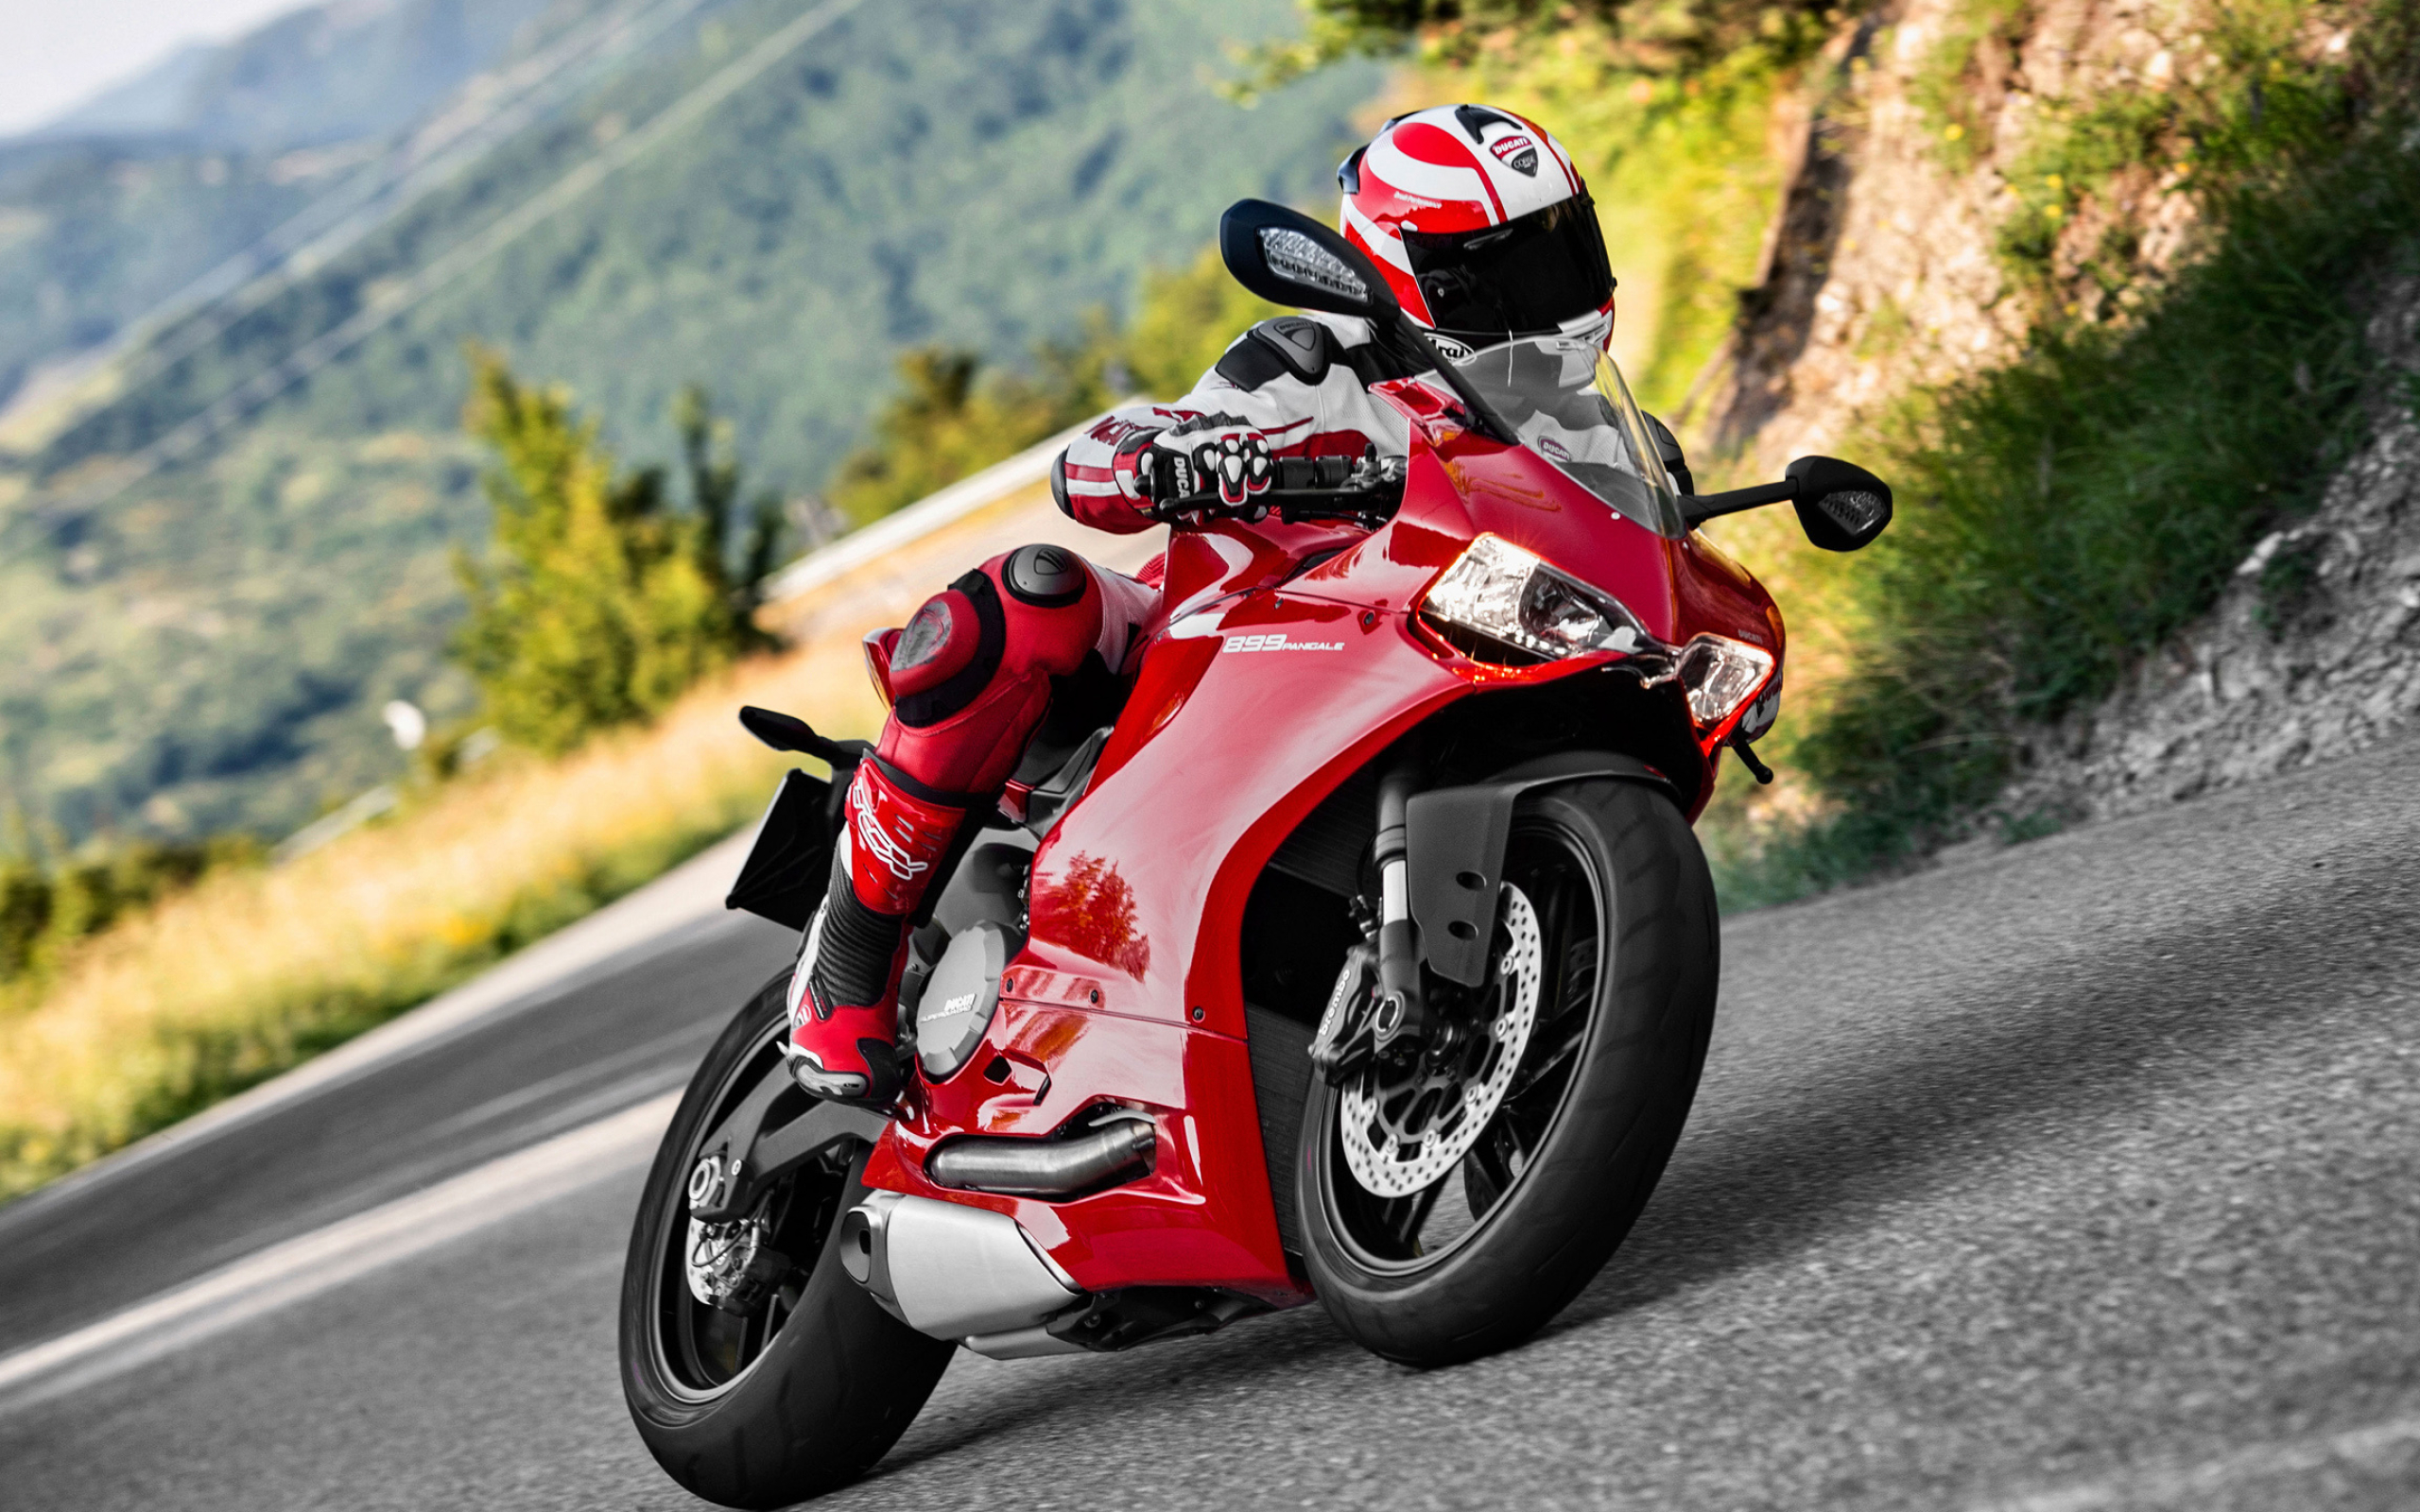 Superbike: Red Ducati 899 Panigale, A professional moto racer, Red protective outfit. 2560x1600 HD Wallpaper.